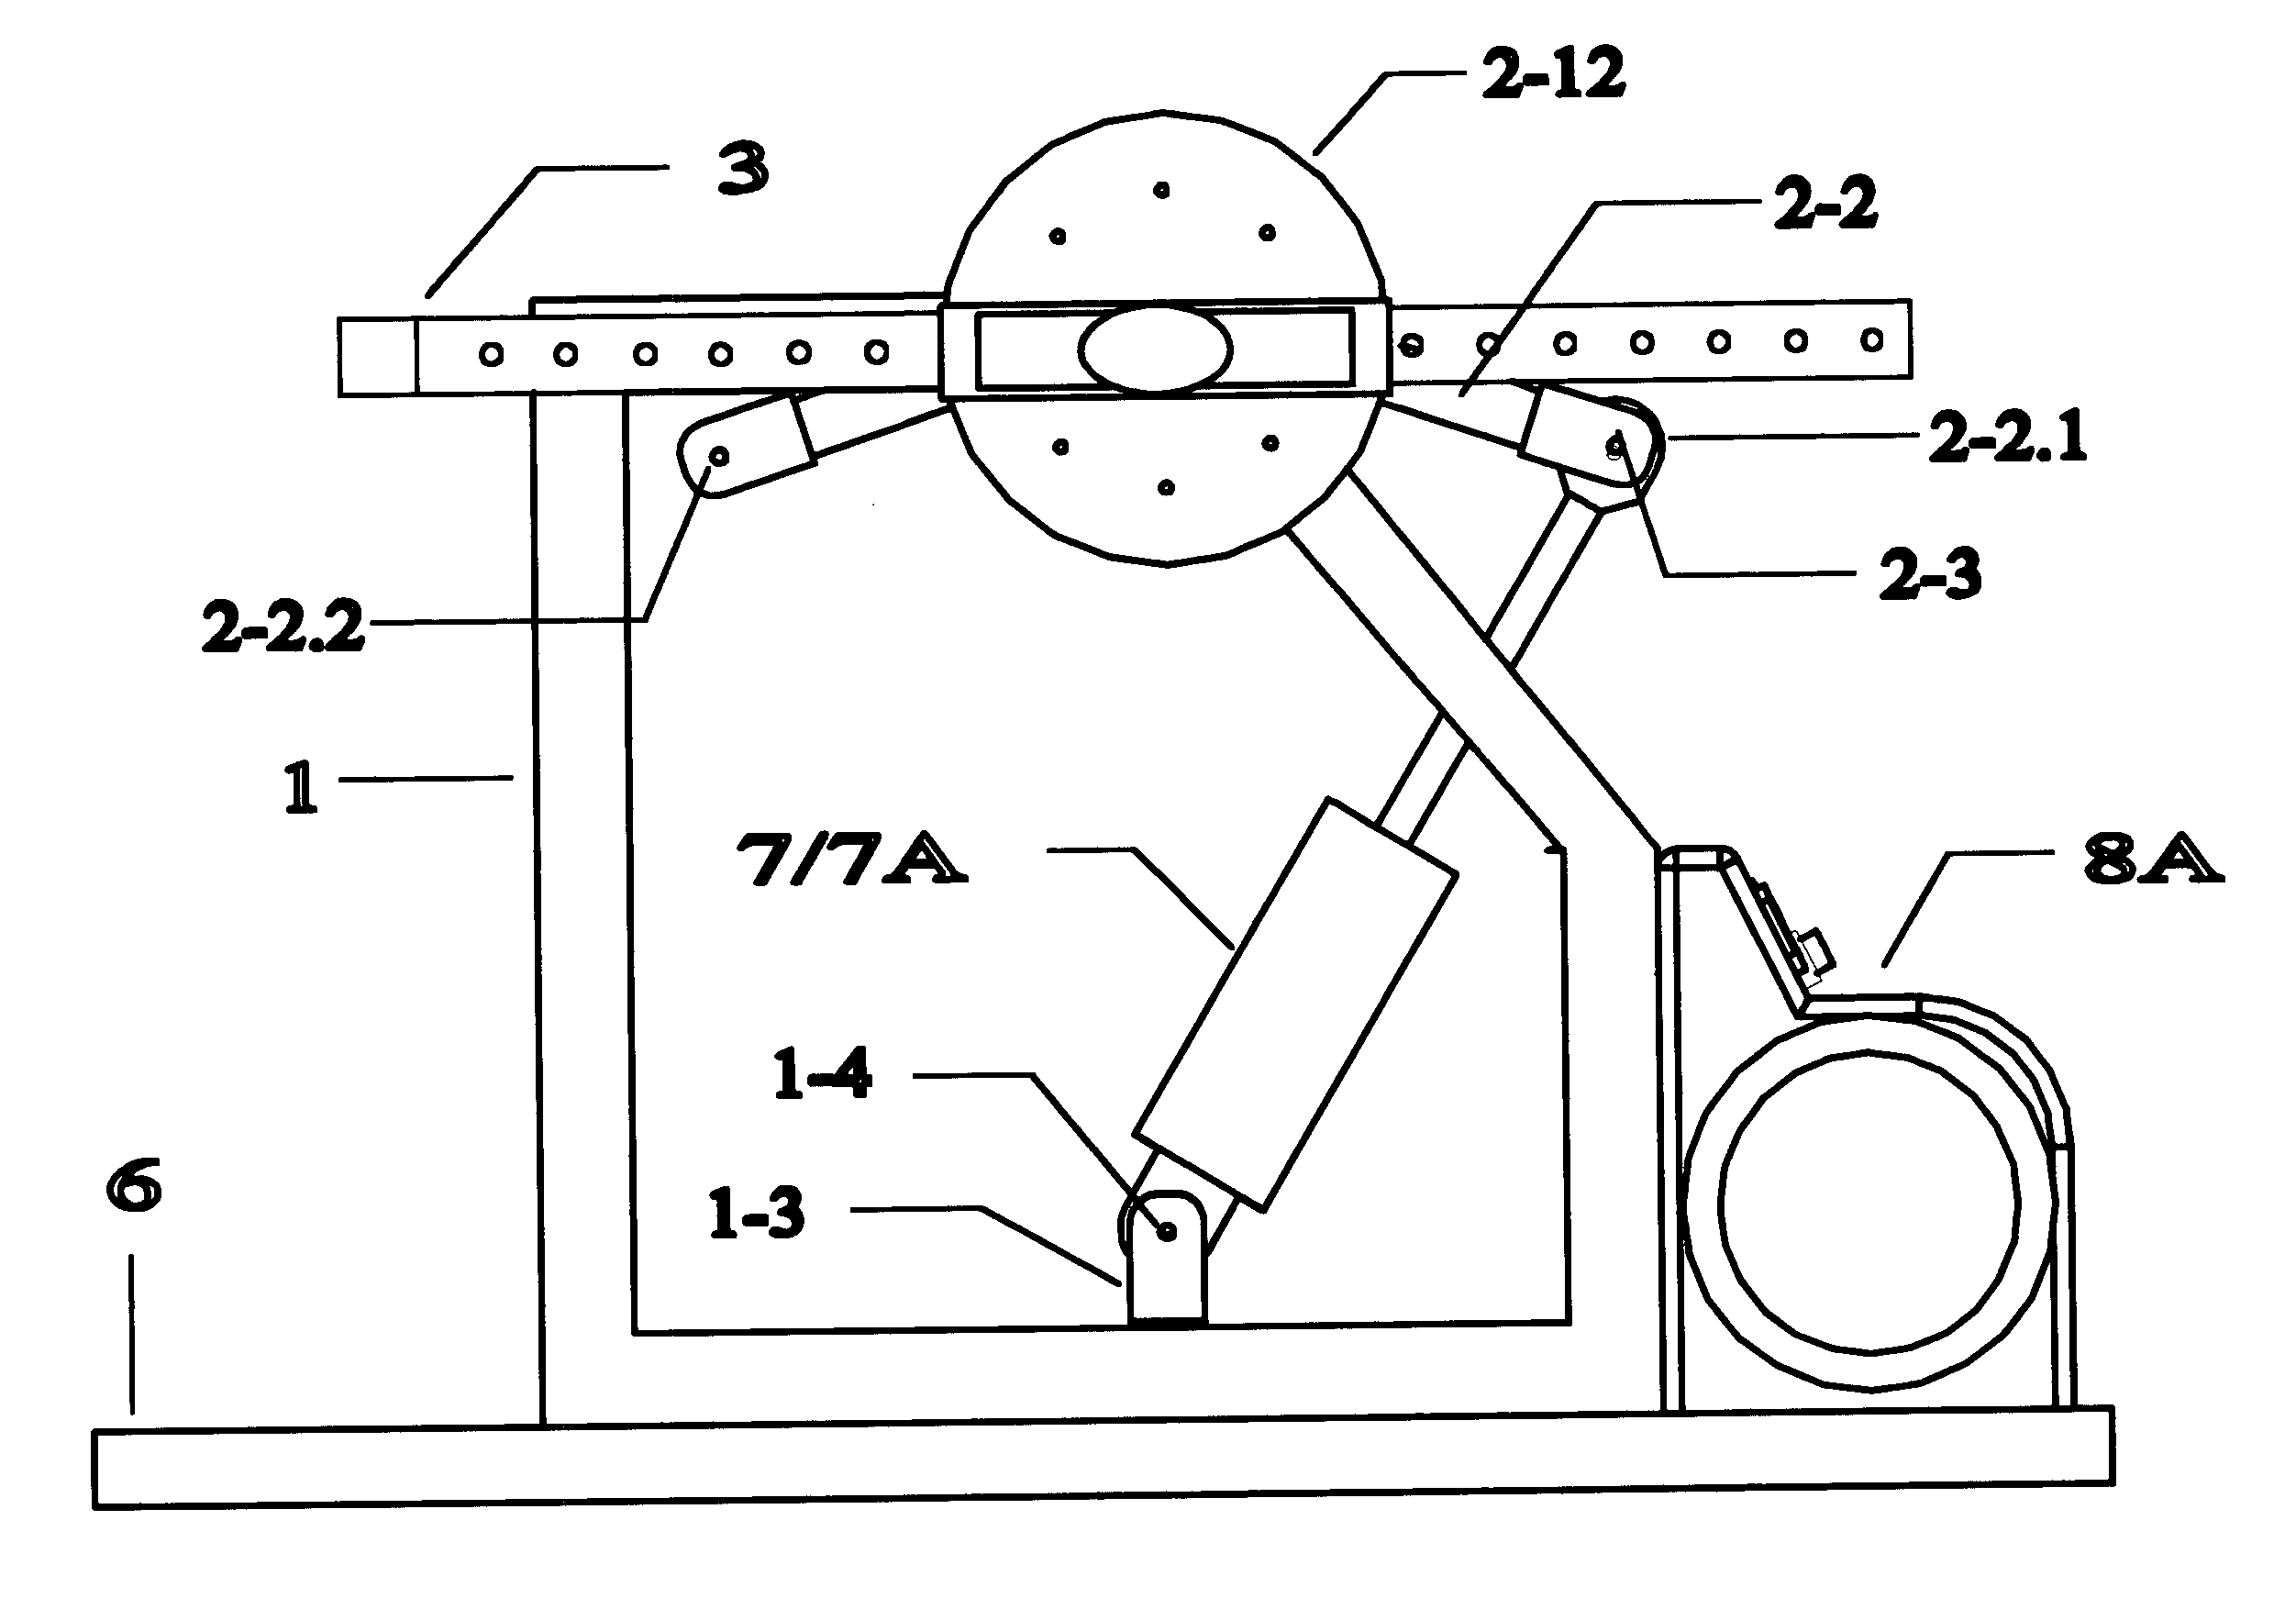 Physical rehabiliation and fitness exercise device